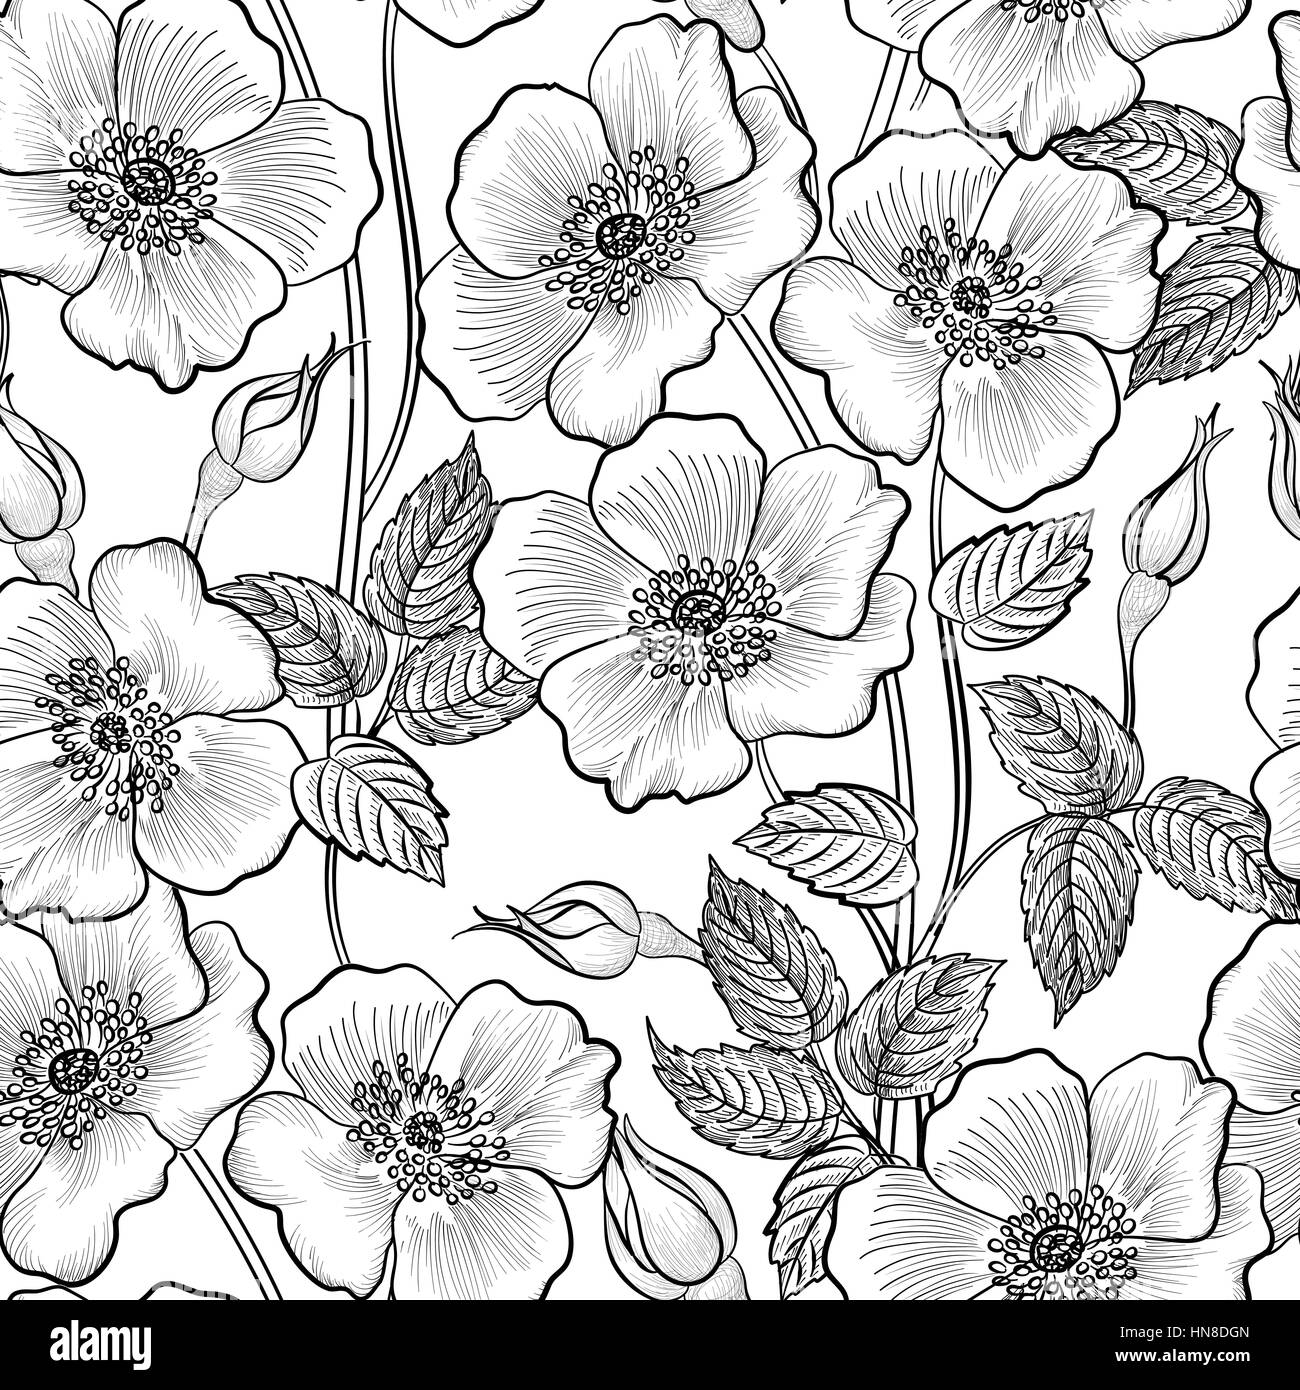 Floral seamless outline sketch pattern. Flower background. Floral tile spring texture with flowers Ornamental flourish garden cover for card design Stock Vector